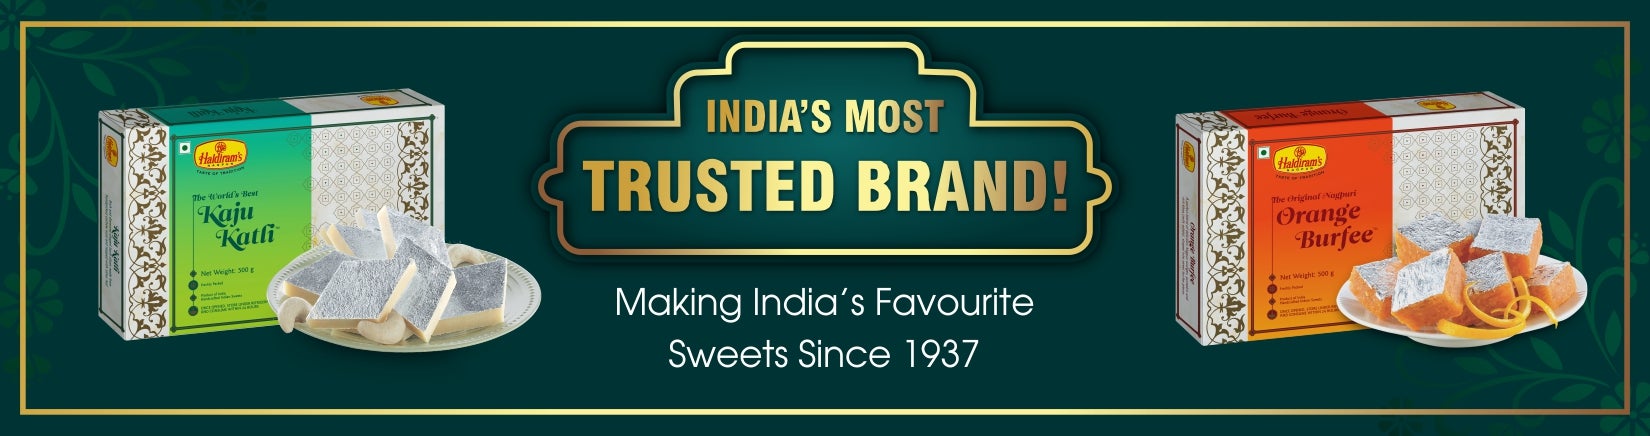 Buy Indian sweets online from trusted brand Haldiram's Nagpur